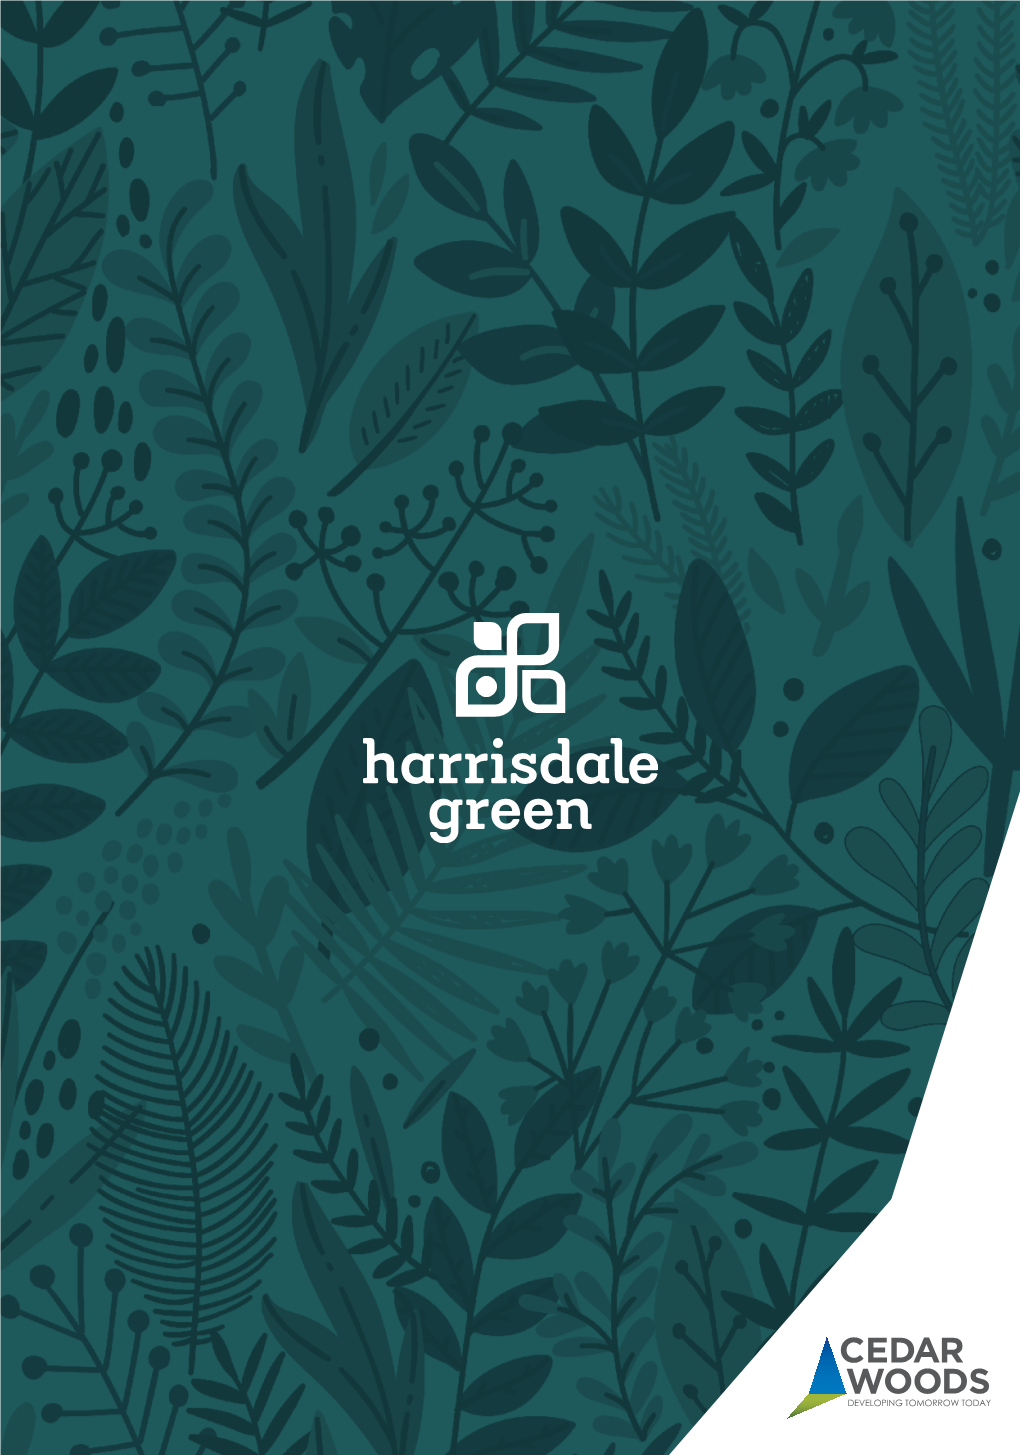 Come Home to Convenience at Harrisdale Green